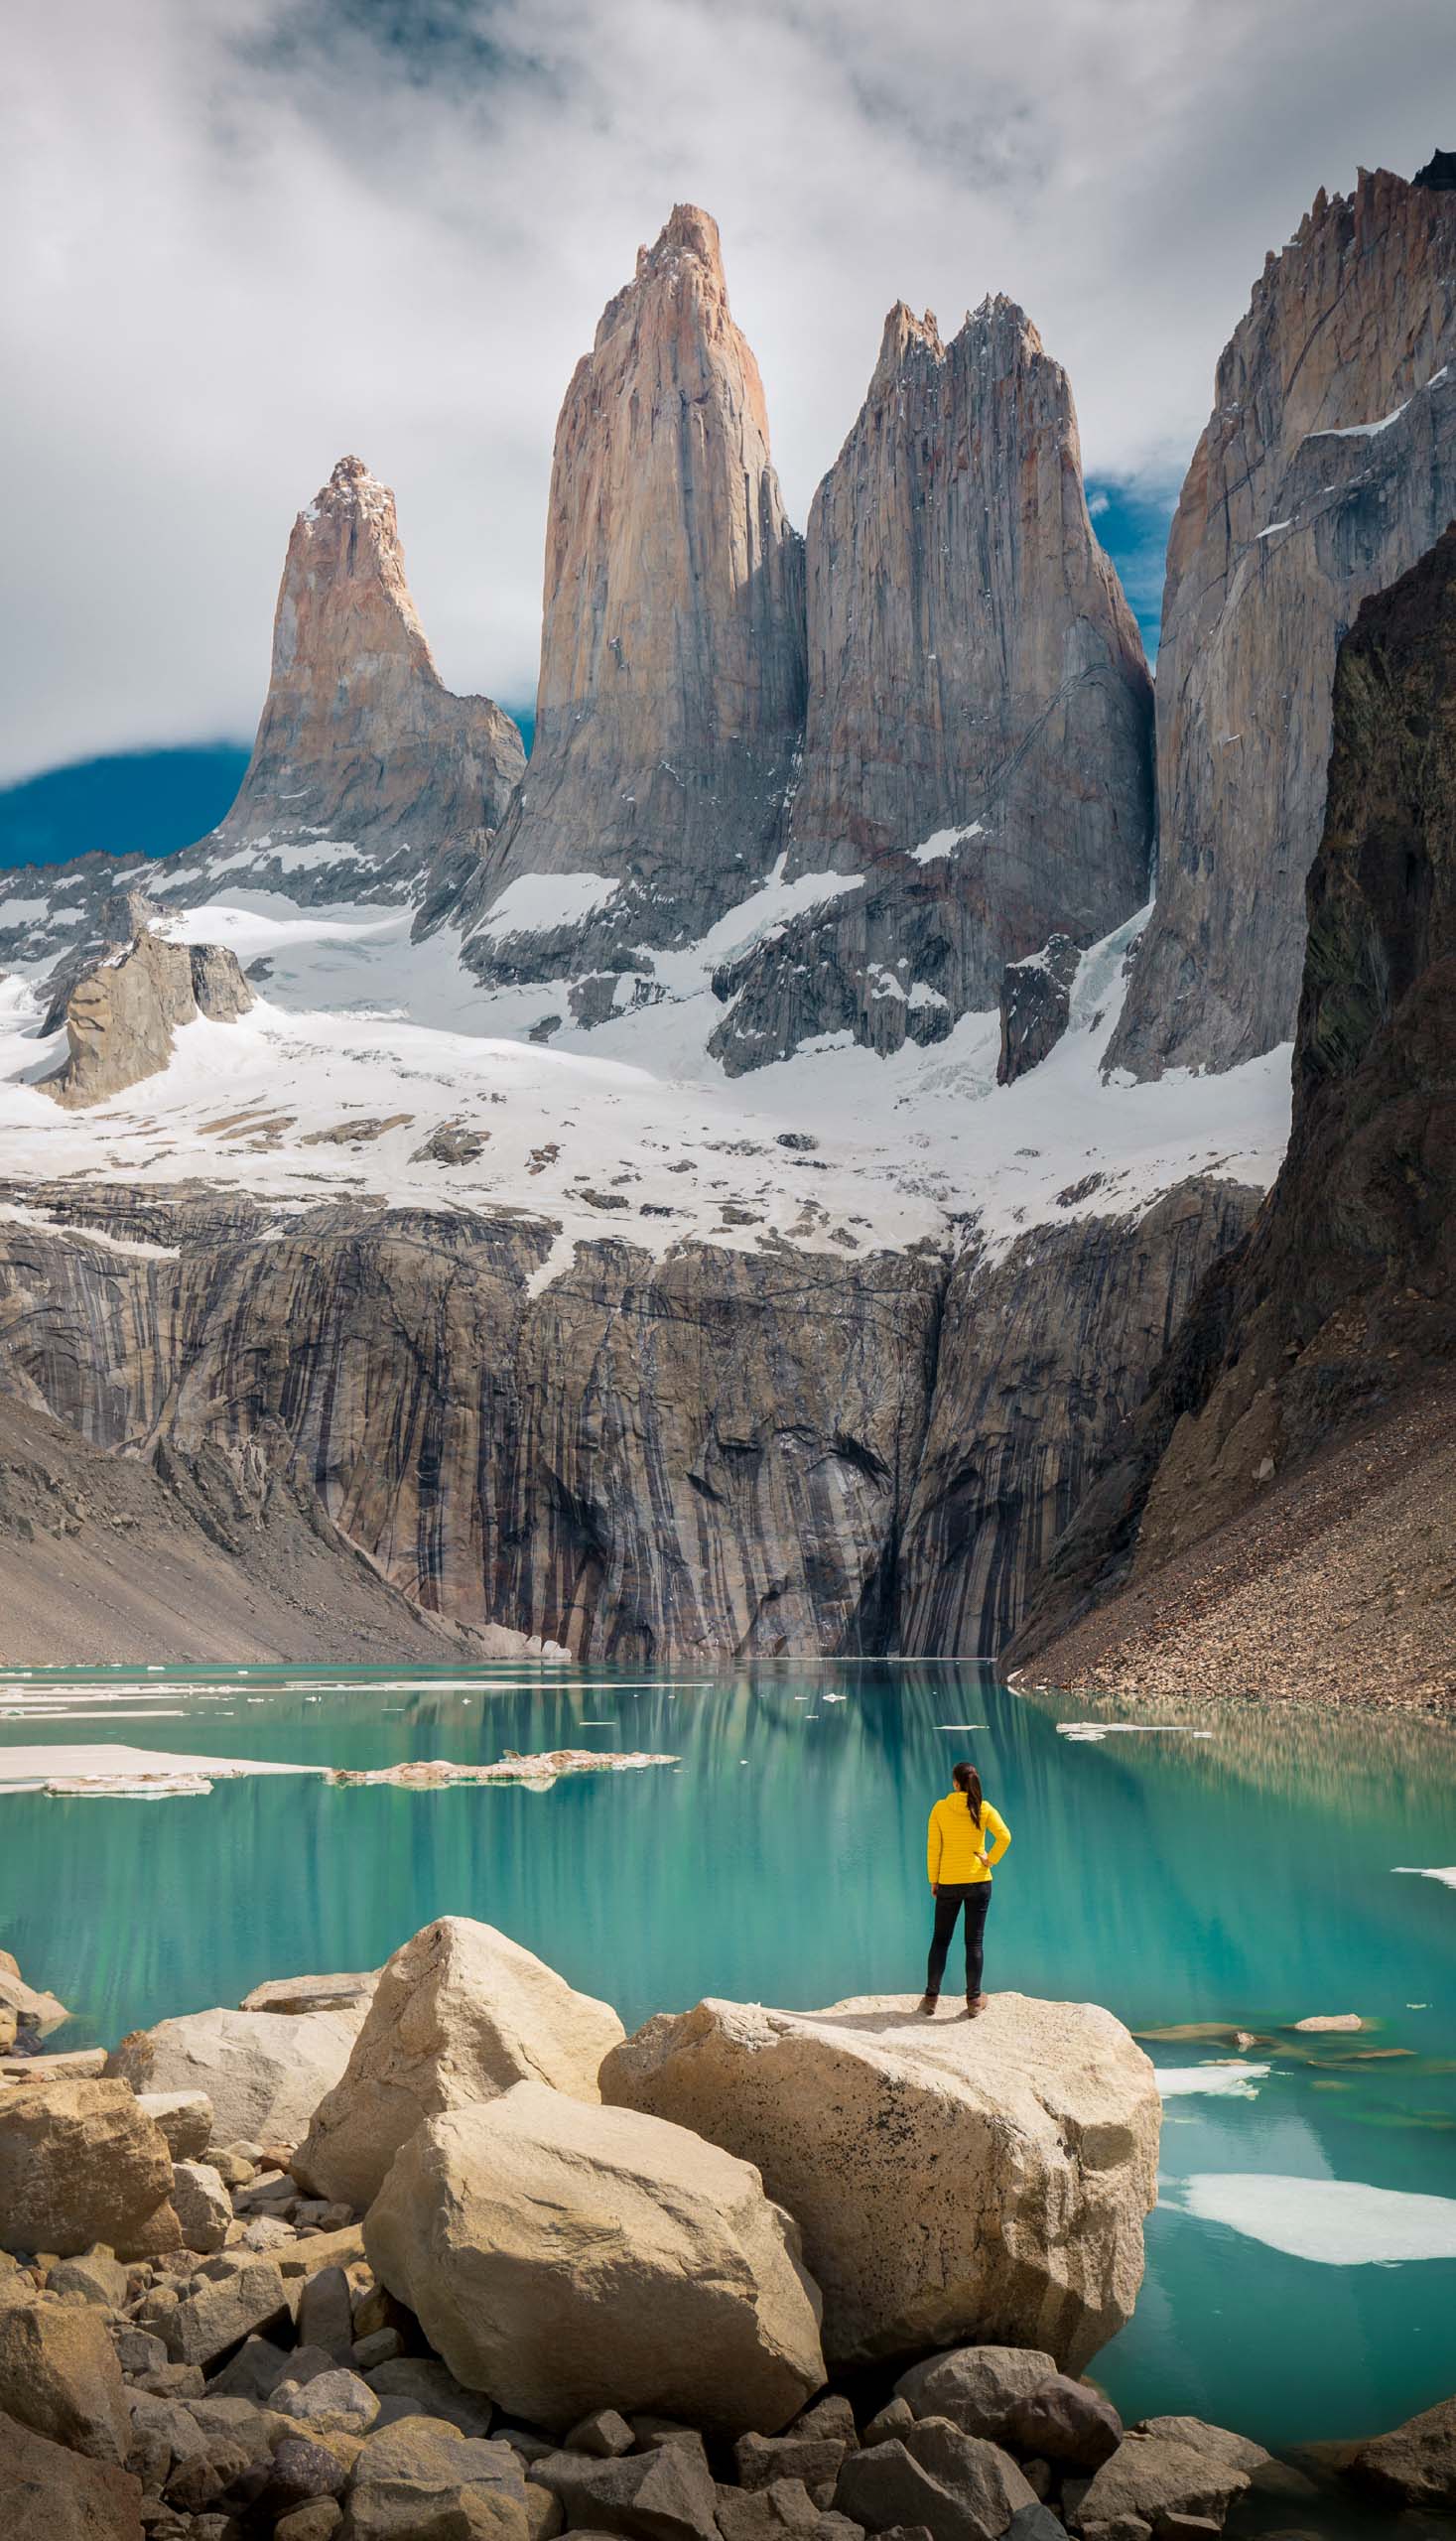 Woman standing on the rock in front of the stunning Torres del Paine peaks.